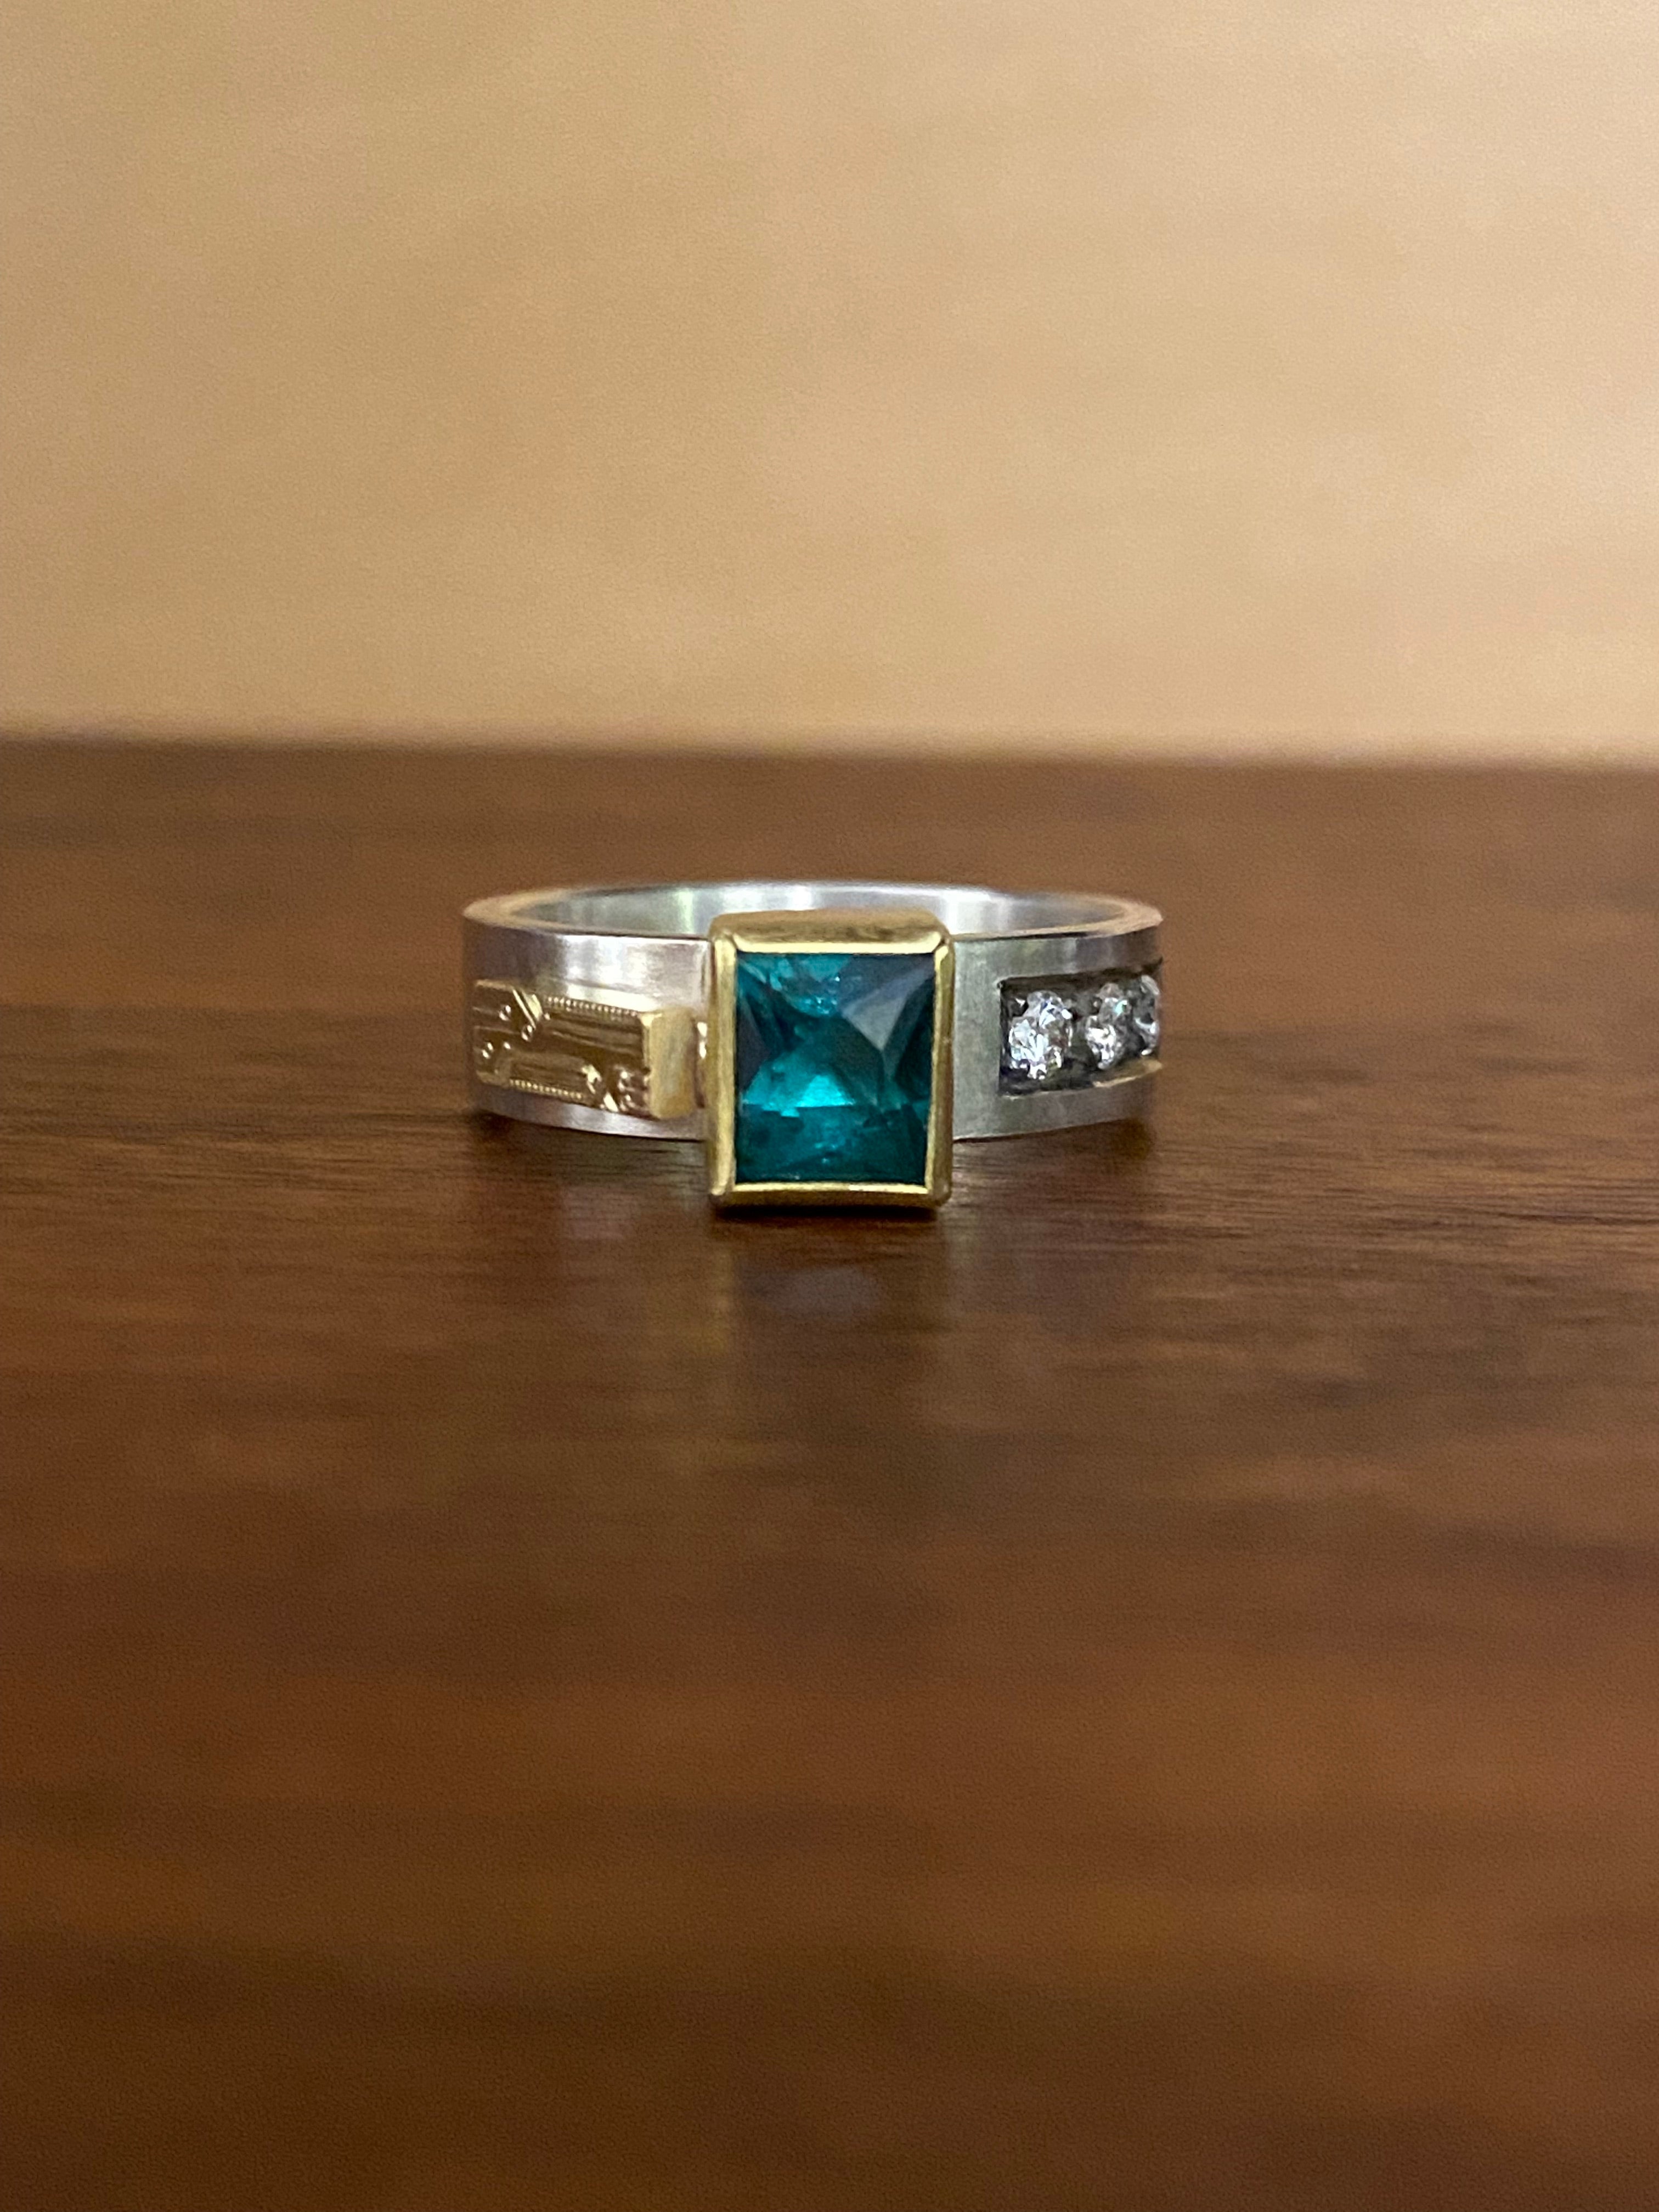 Sam Woehrmann- Green Tourmaline with a Trio of Diamonds and Engraved Bar Ring